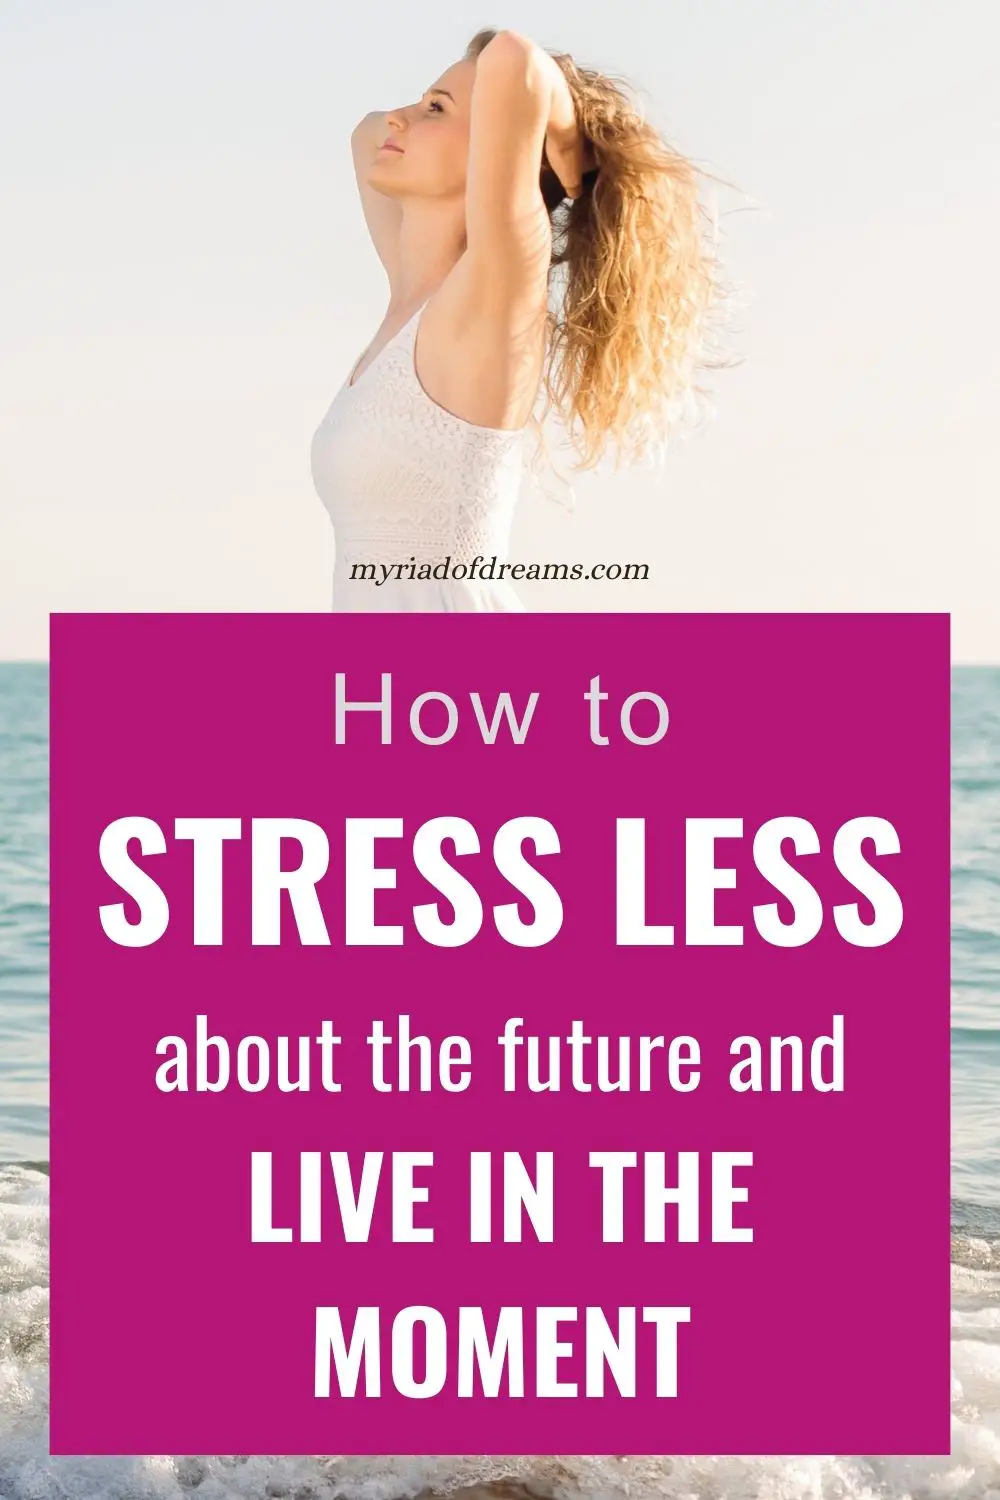 So, stressing less about the future is about taking control of our present. It's understanding that happiness isn't something we chase; it's already here, waiting for us to notice it. 